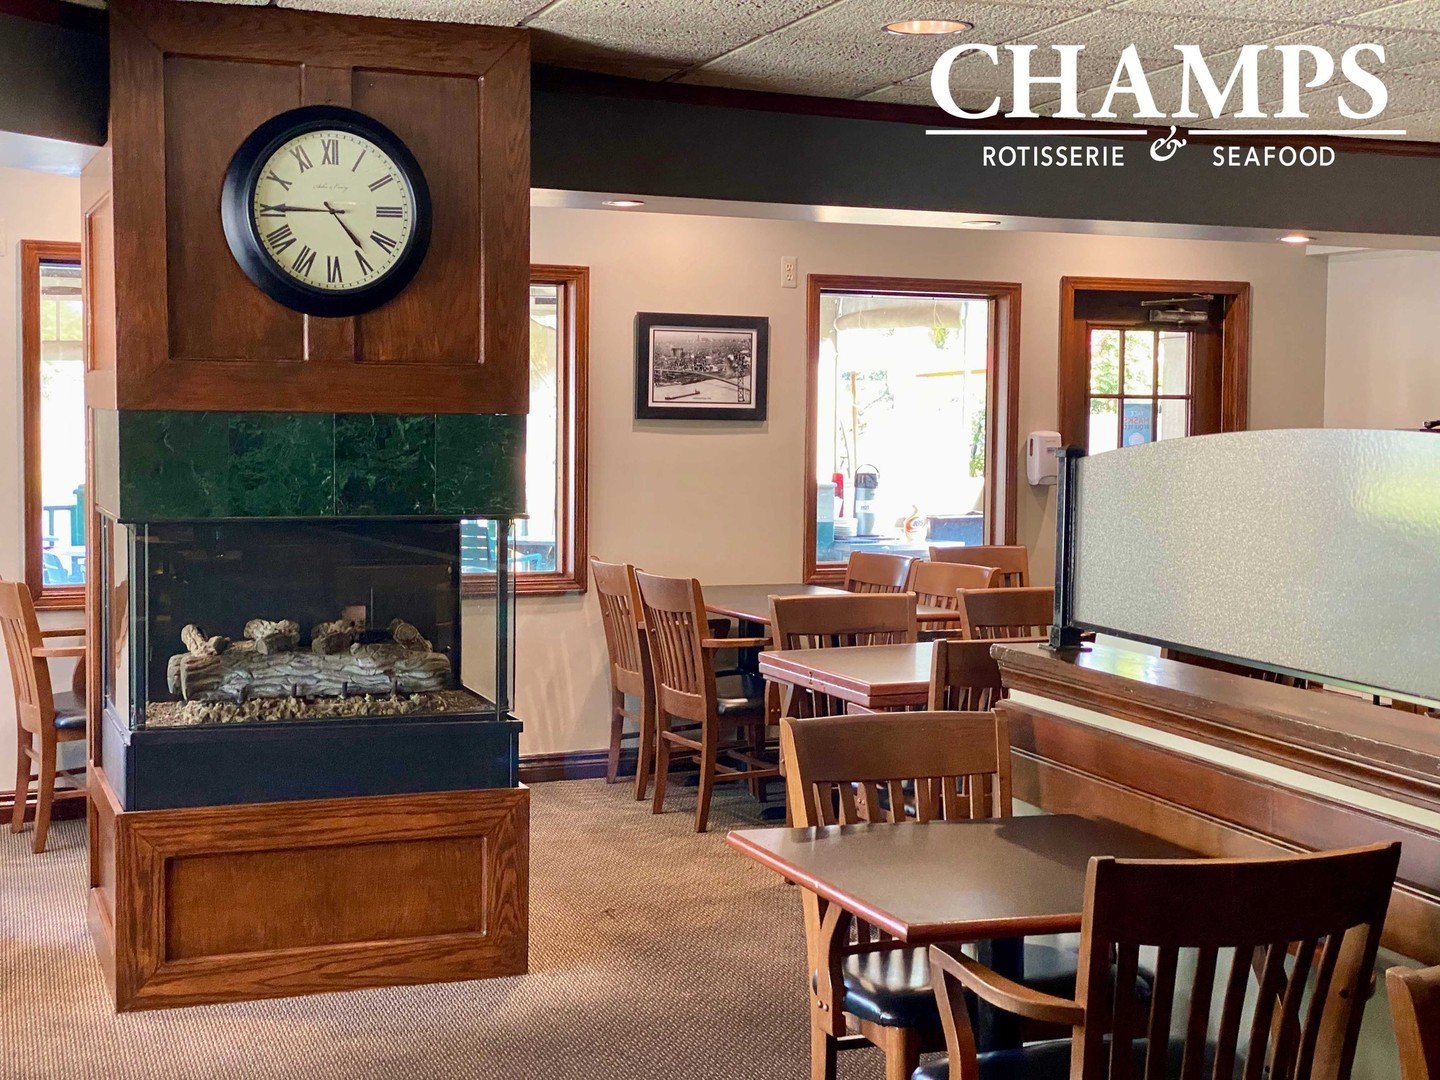 Experience relaxation and comfort at Champs&mdash;unwind fireside.